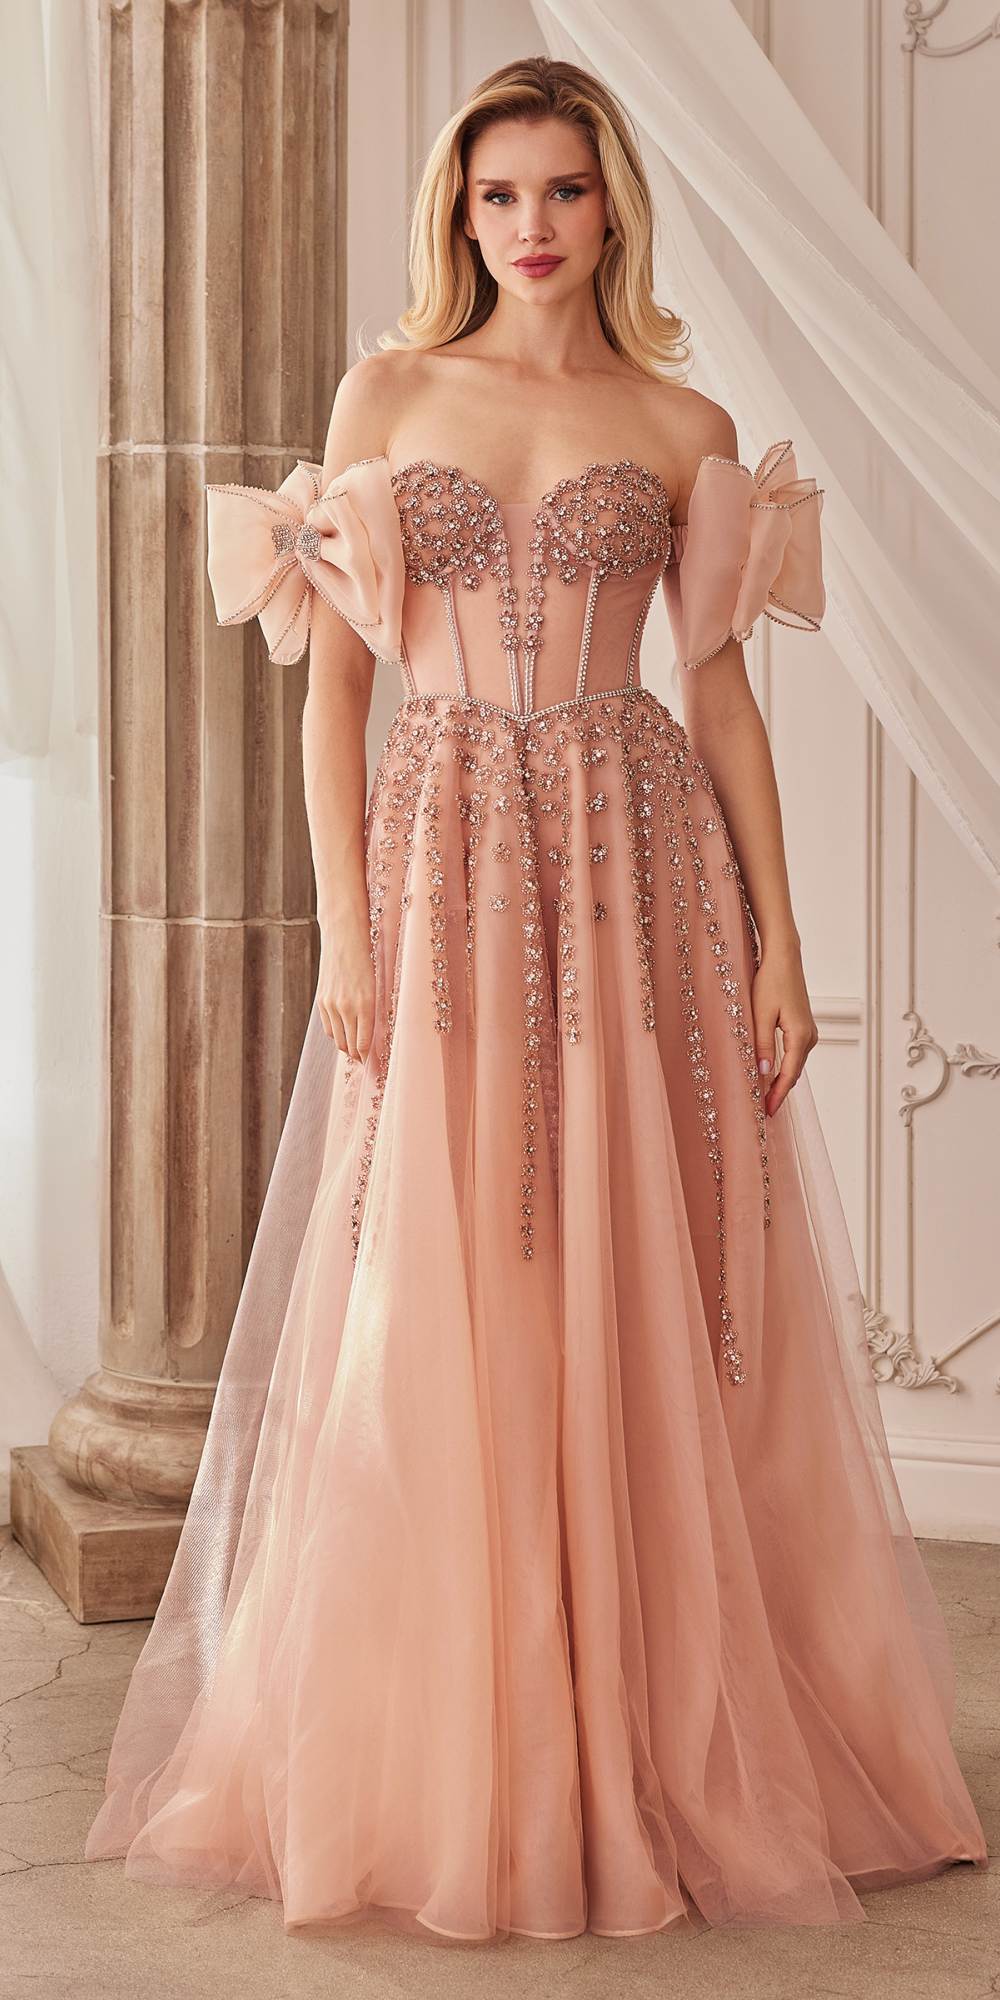 Andrea & Leo A1338 Long Strapless Beaded Gown with Bow Arm Bands - Rose Gold